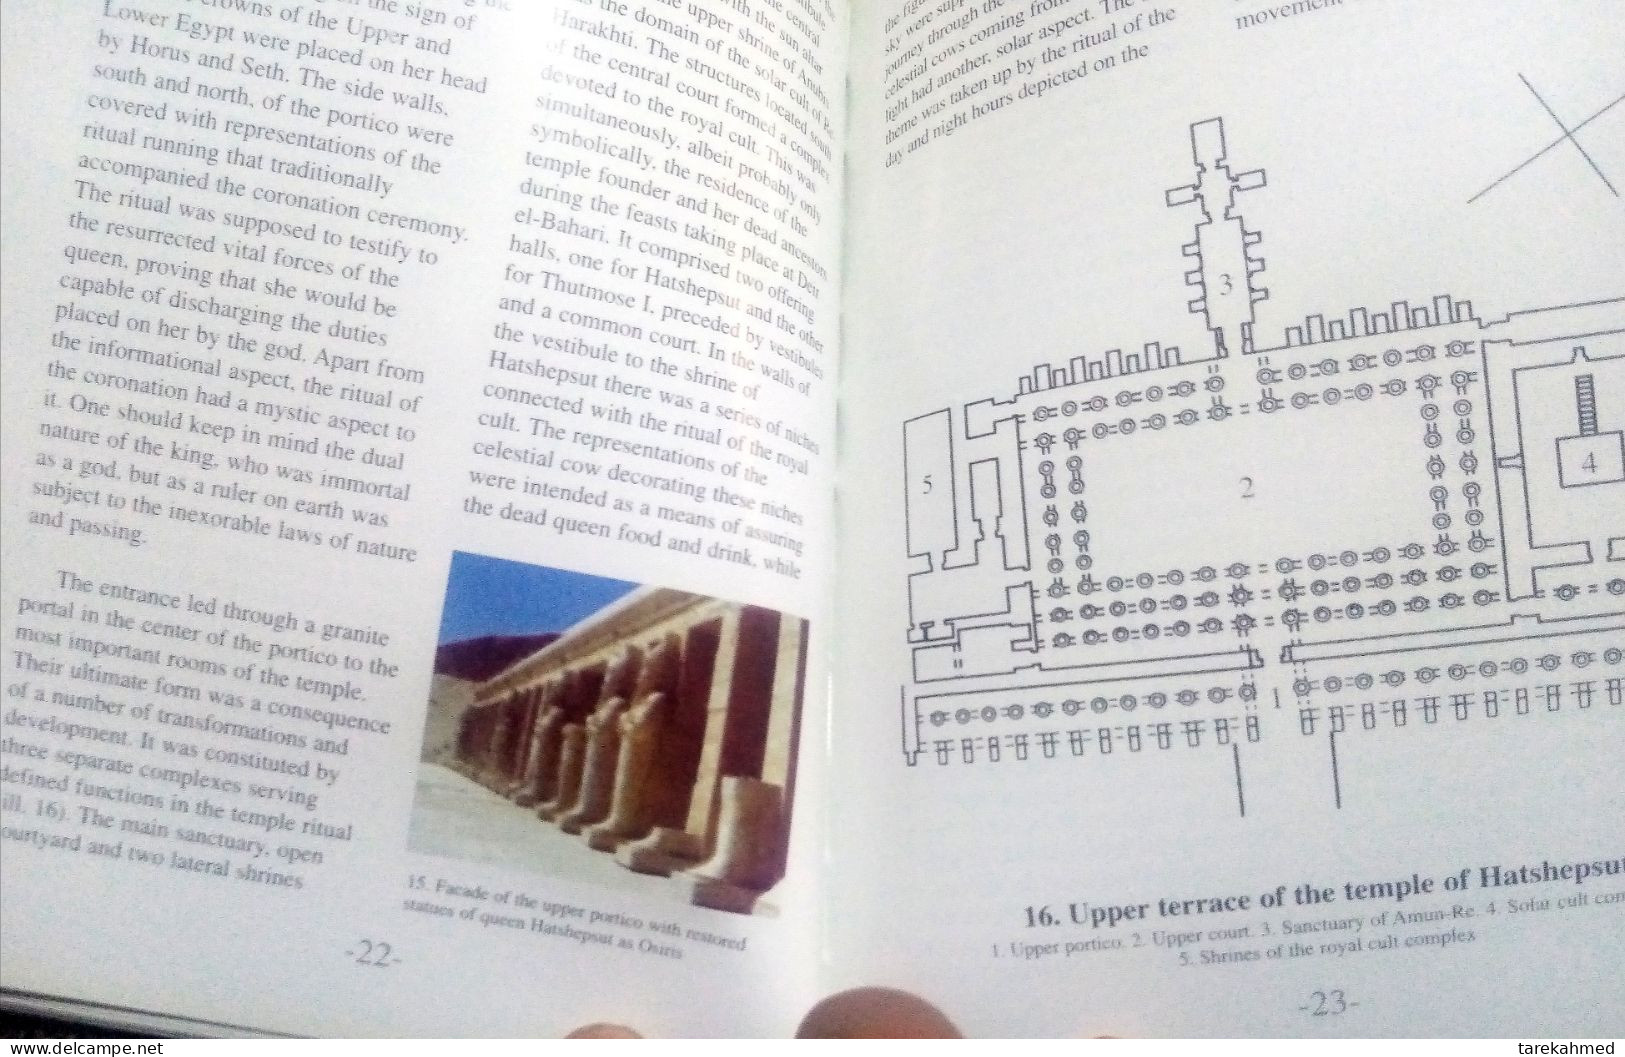 Egypt 2000, Booklet & Catalog of the Temple of Hatshepsut, Dier bahary, Luxor, 47 page, Dolab